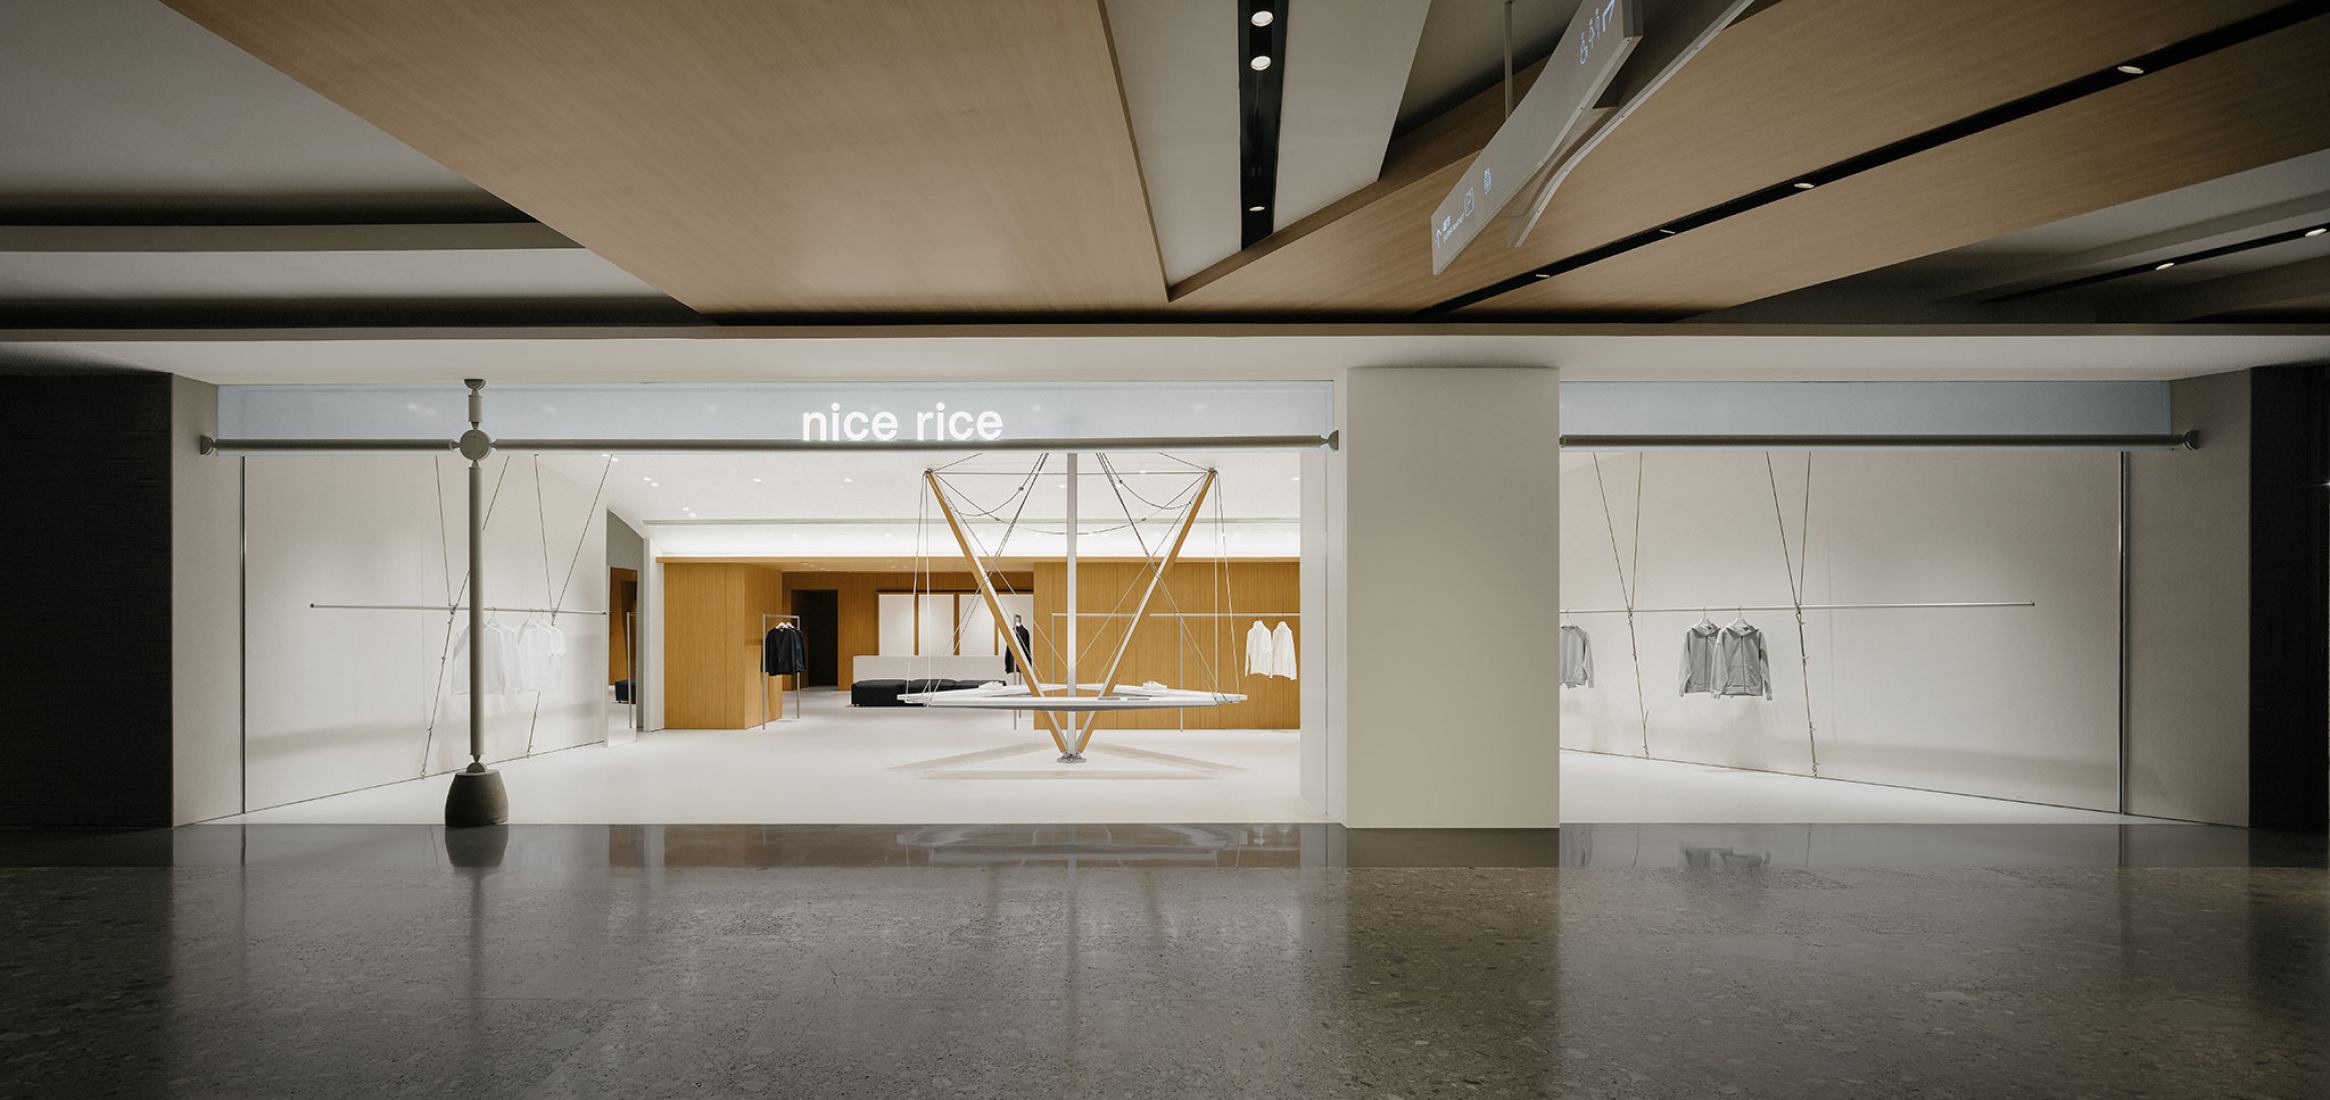 Nice rice, Shenzhen concept store by Say Architects. Photography by Yanyu.